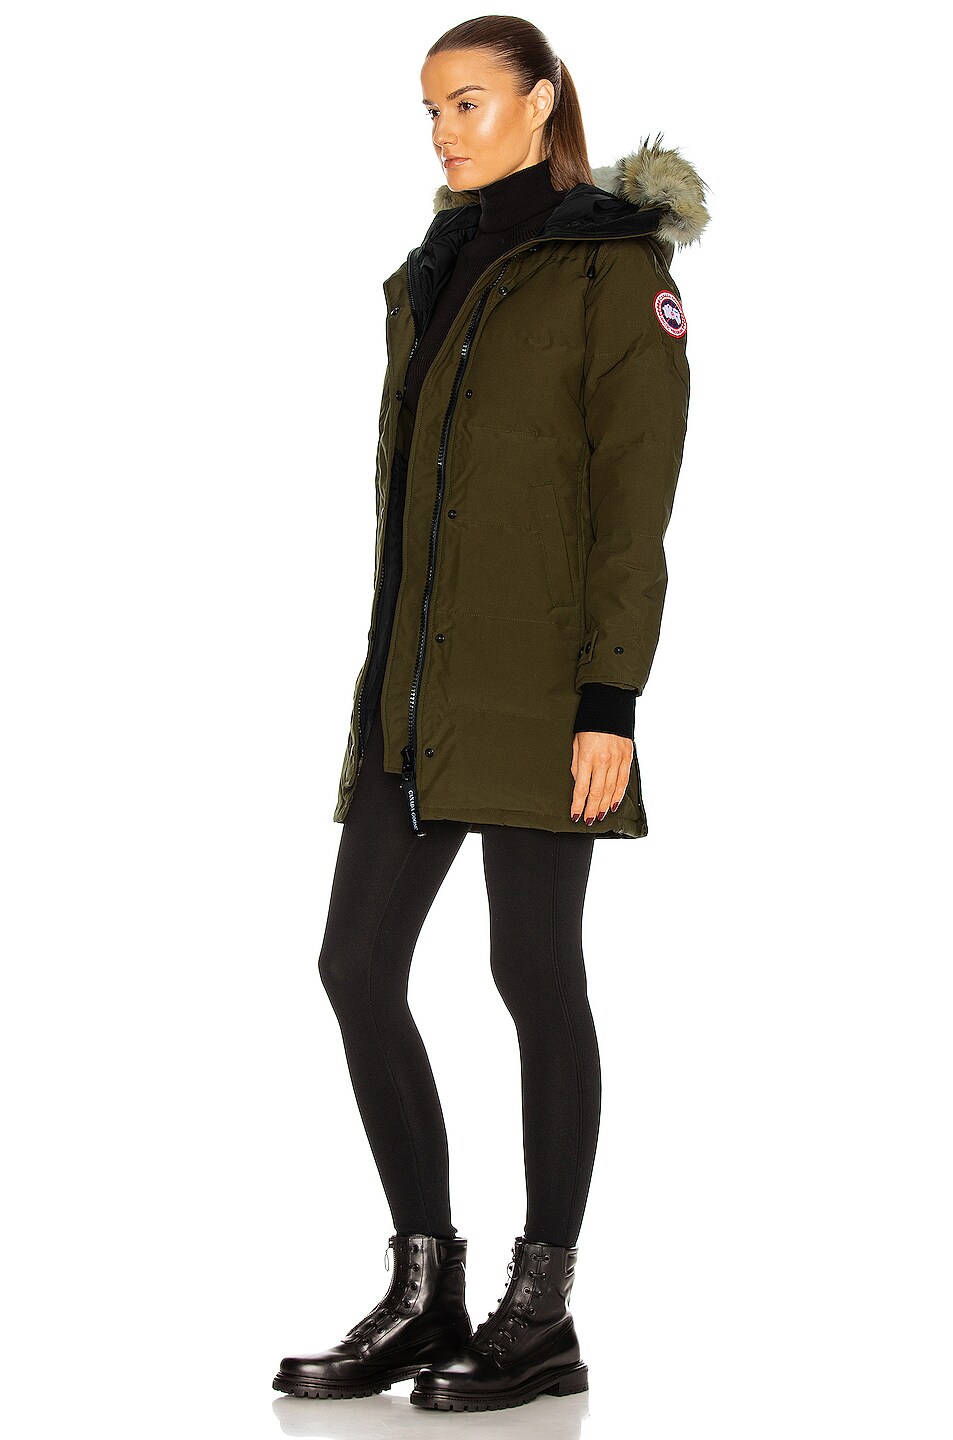 Canada Goose down replica discounts - Canada Goose Shelburne Parka with Coyote Fur in Military Green | FWRD